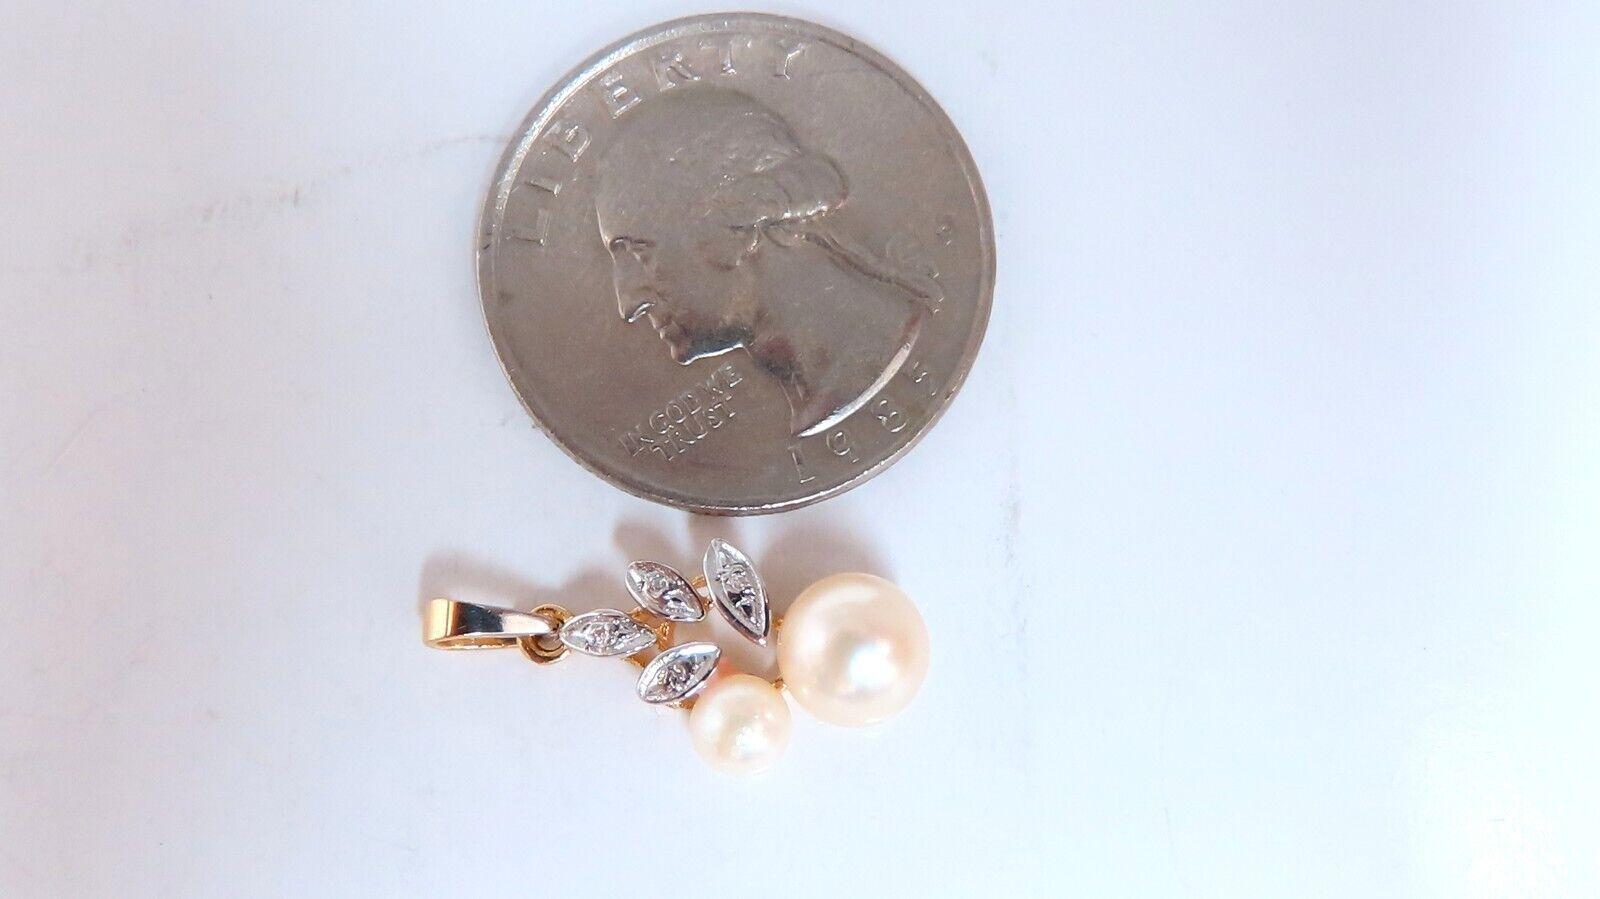 .05ct natural round diamond Pearl pendant

Overall measurements 18 X 10mm

1.3 grams

14kt gold